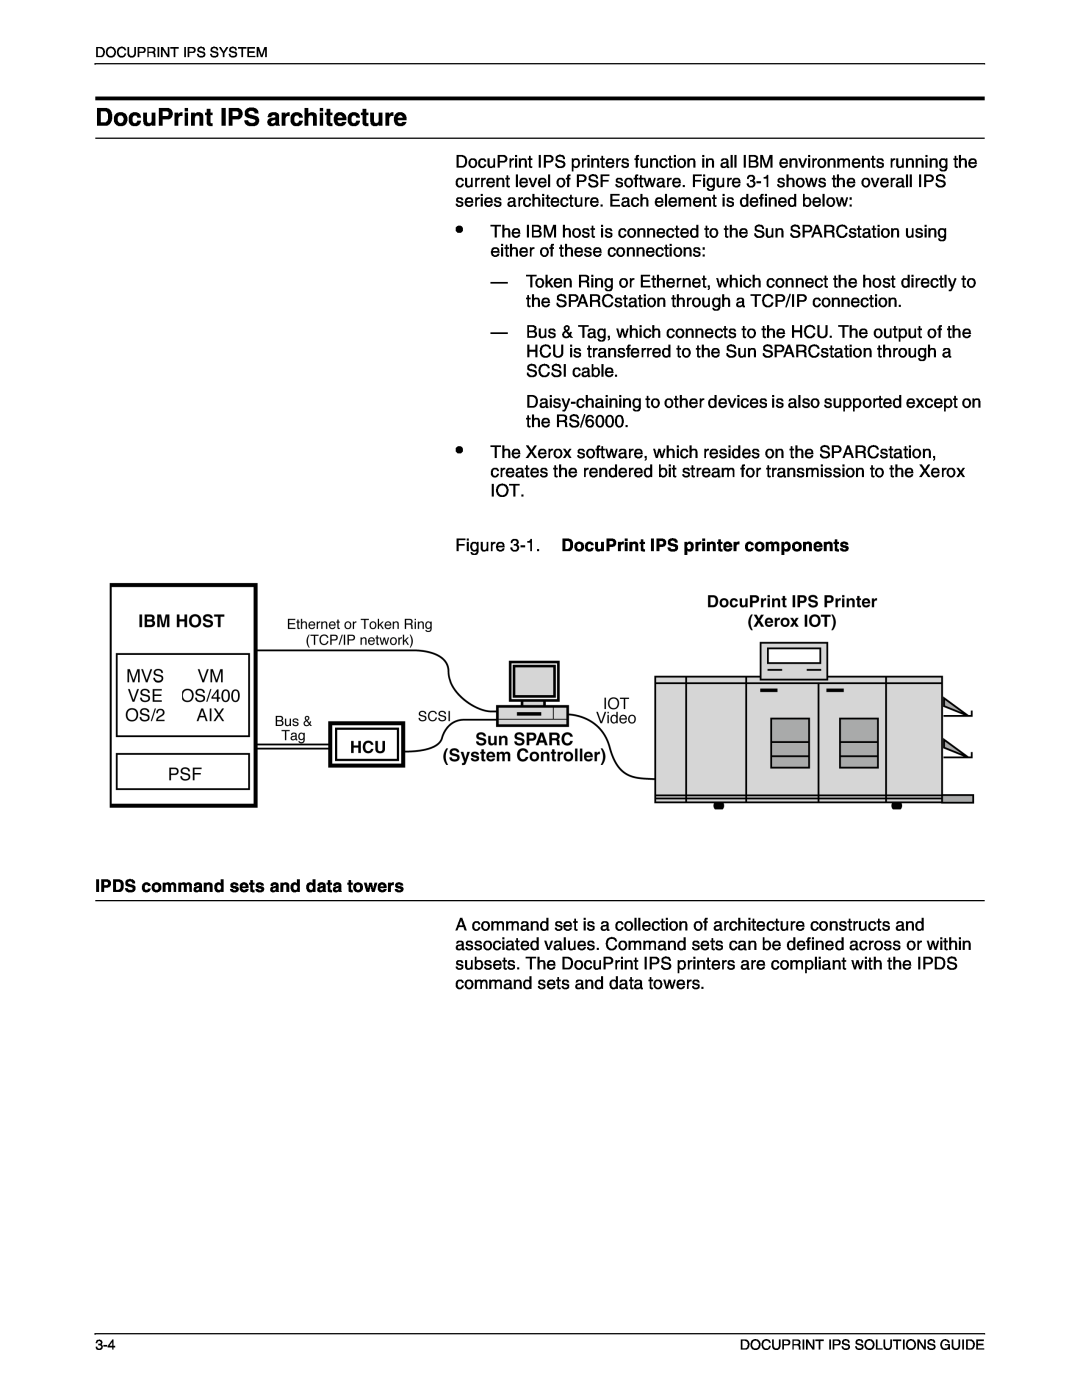 Xerox 721P88200 manual DocuPrint IPS architecture, 1. DocuPrint IPS printer components, IPDS command sets and data towers 